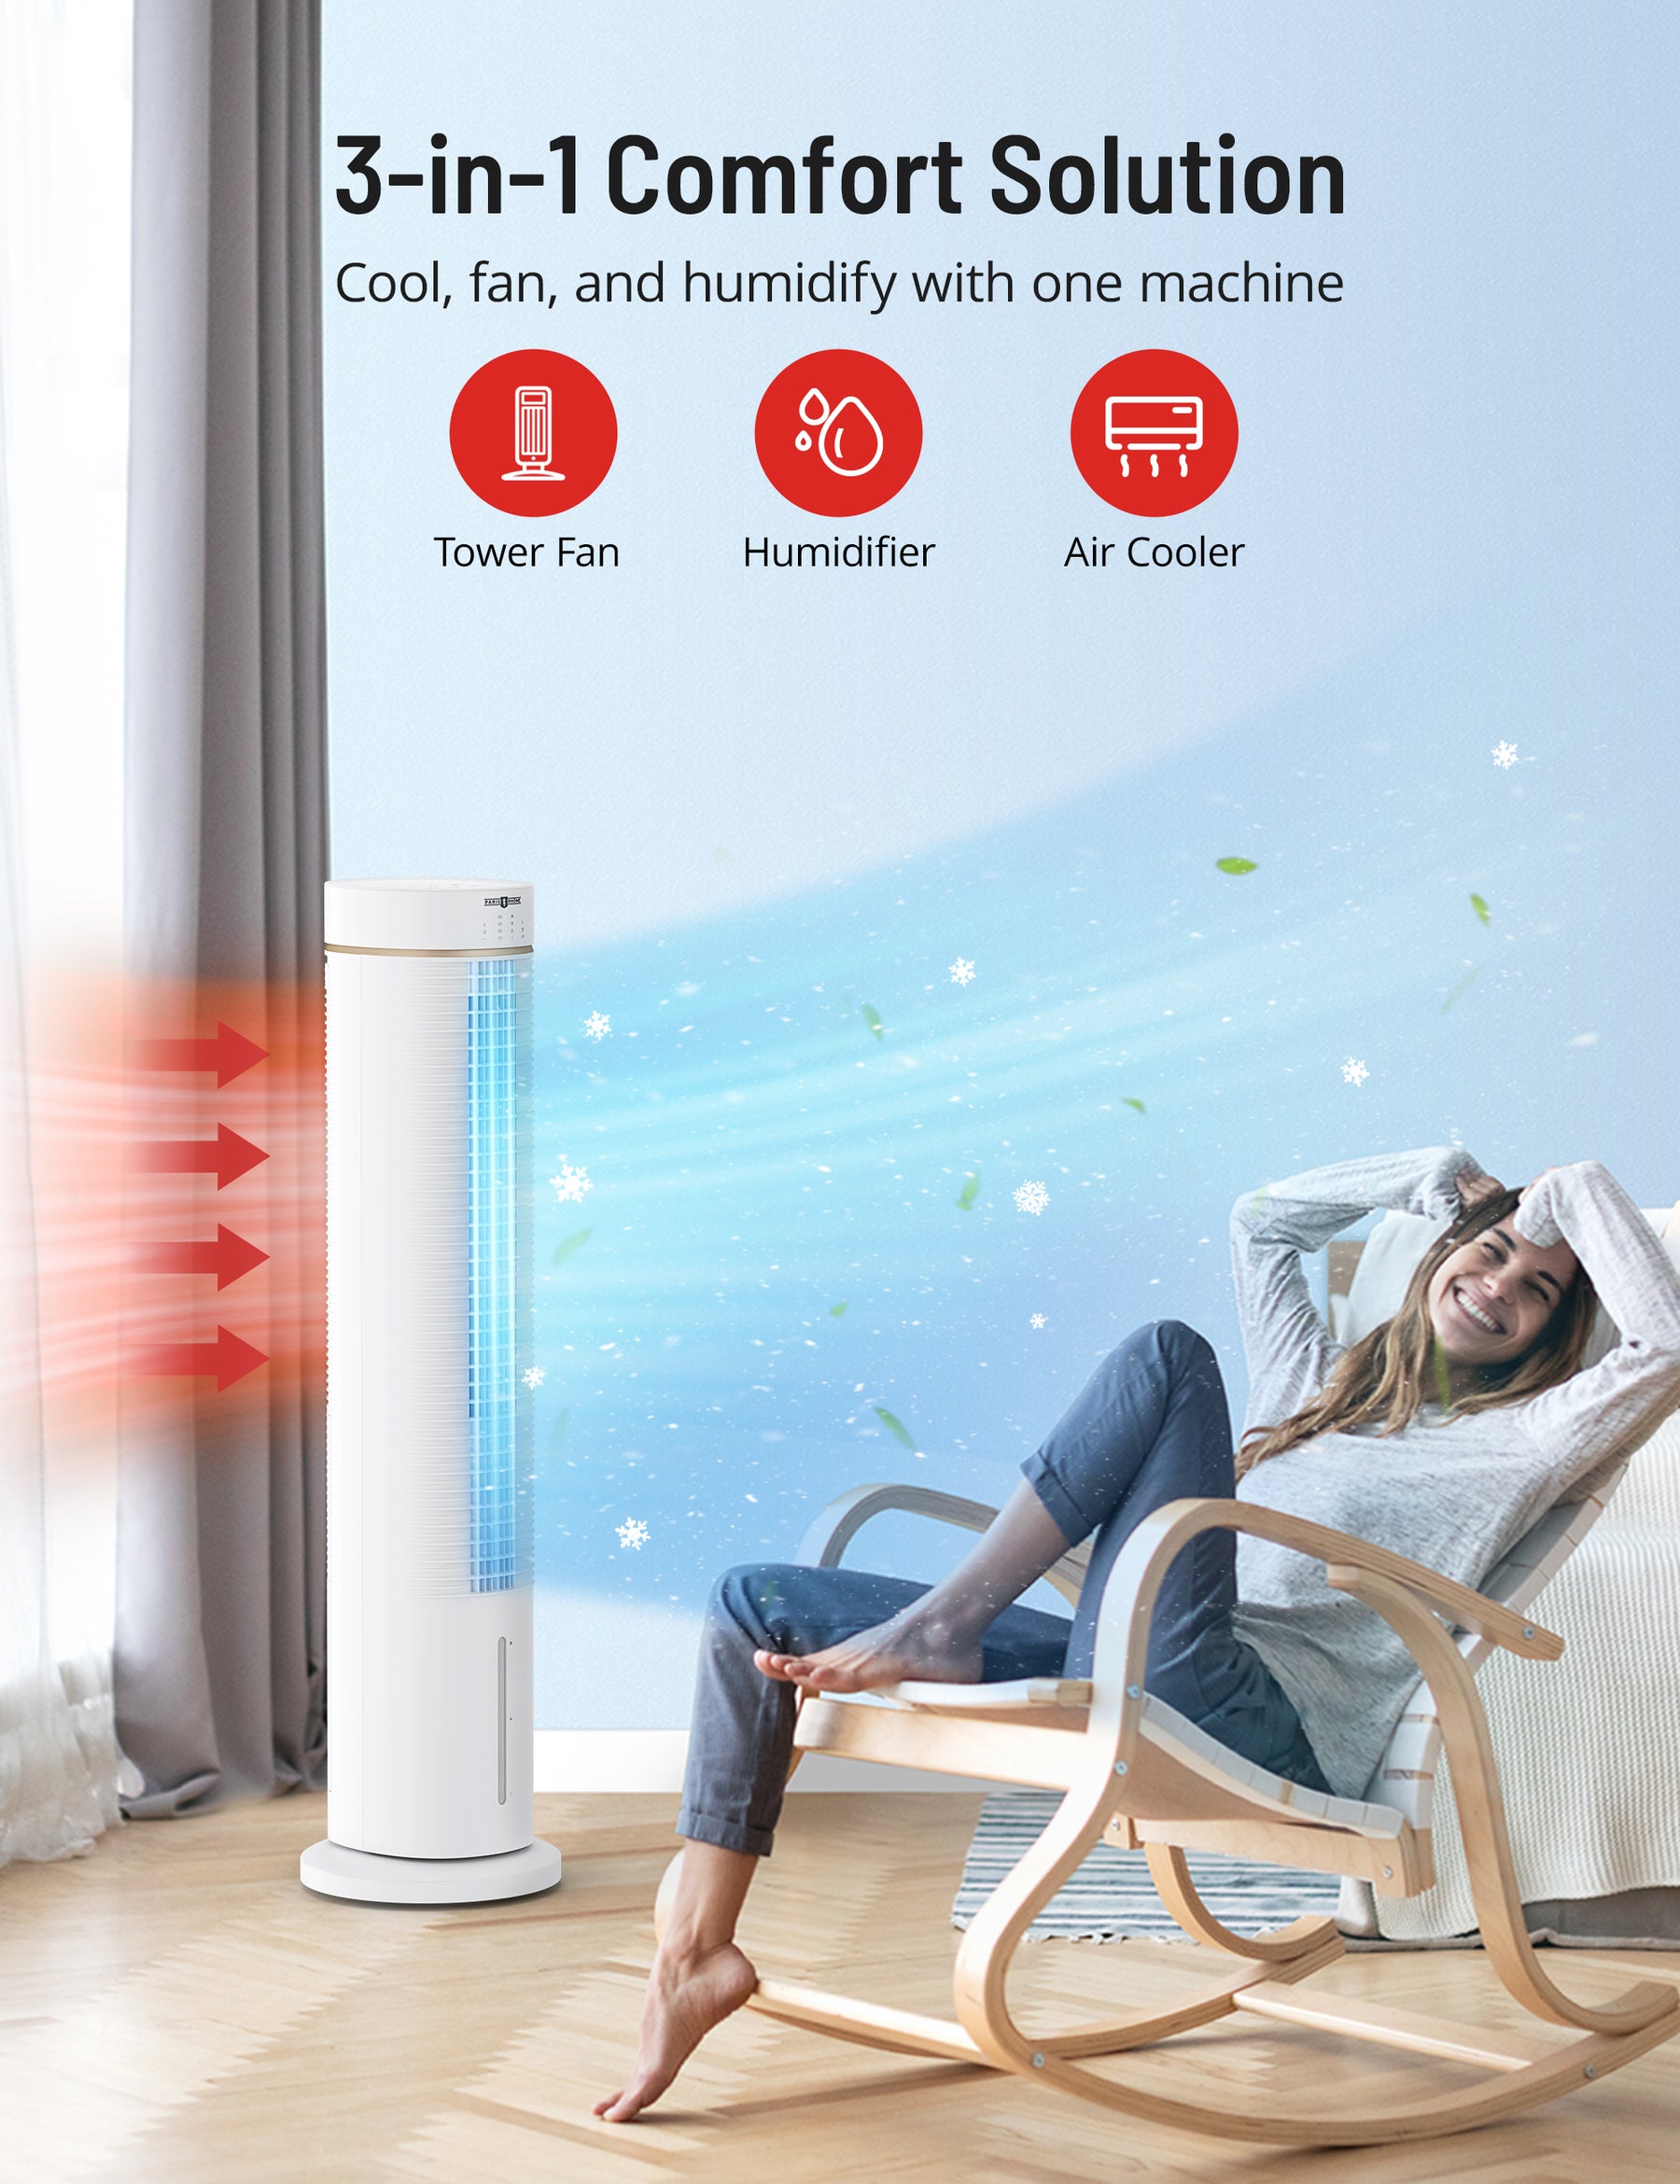 3-in-1 Comfort Solution Cool, fan, and humidify with one machine